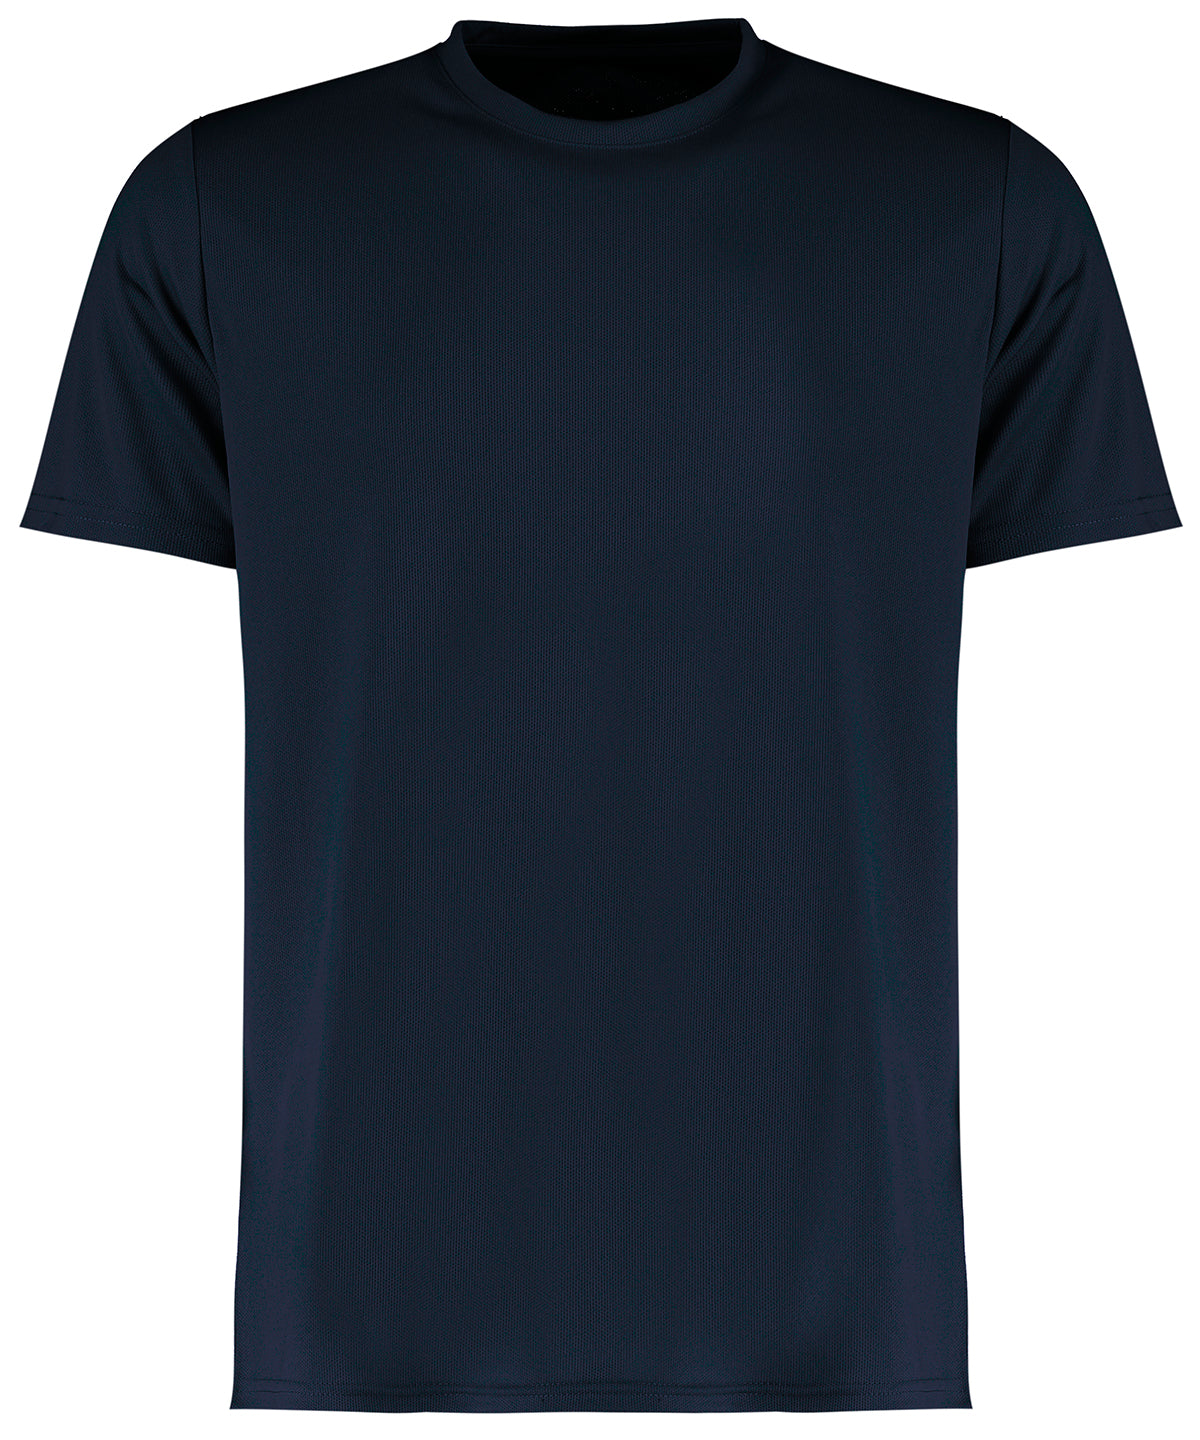 Cooltex® Plus Wicking Tee (regular Fit)